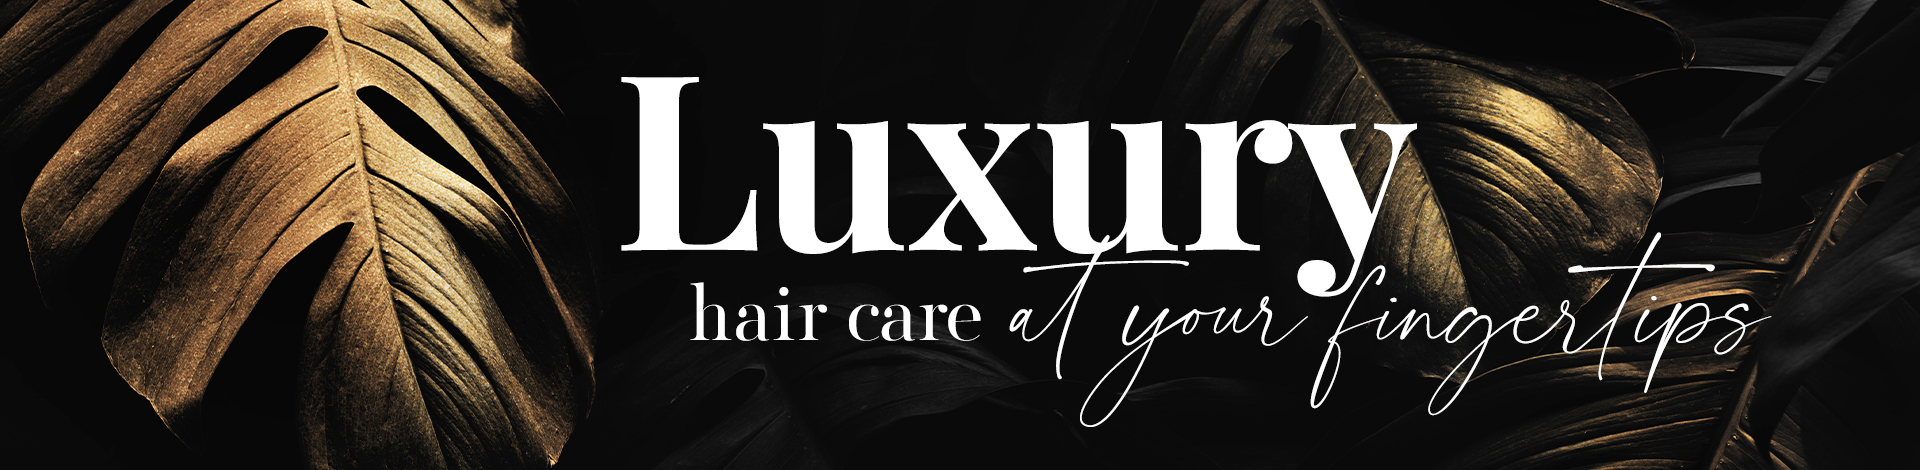 luxury-hair-care-collections-banner